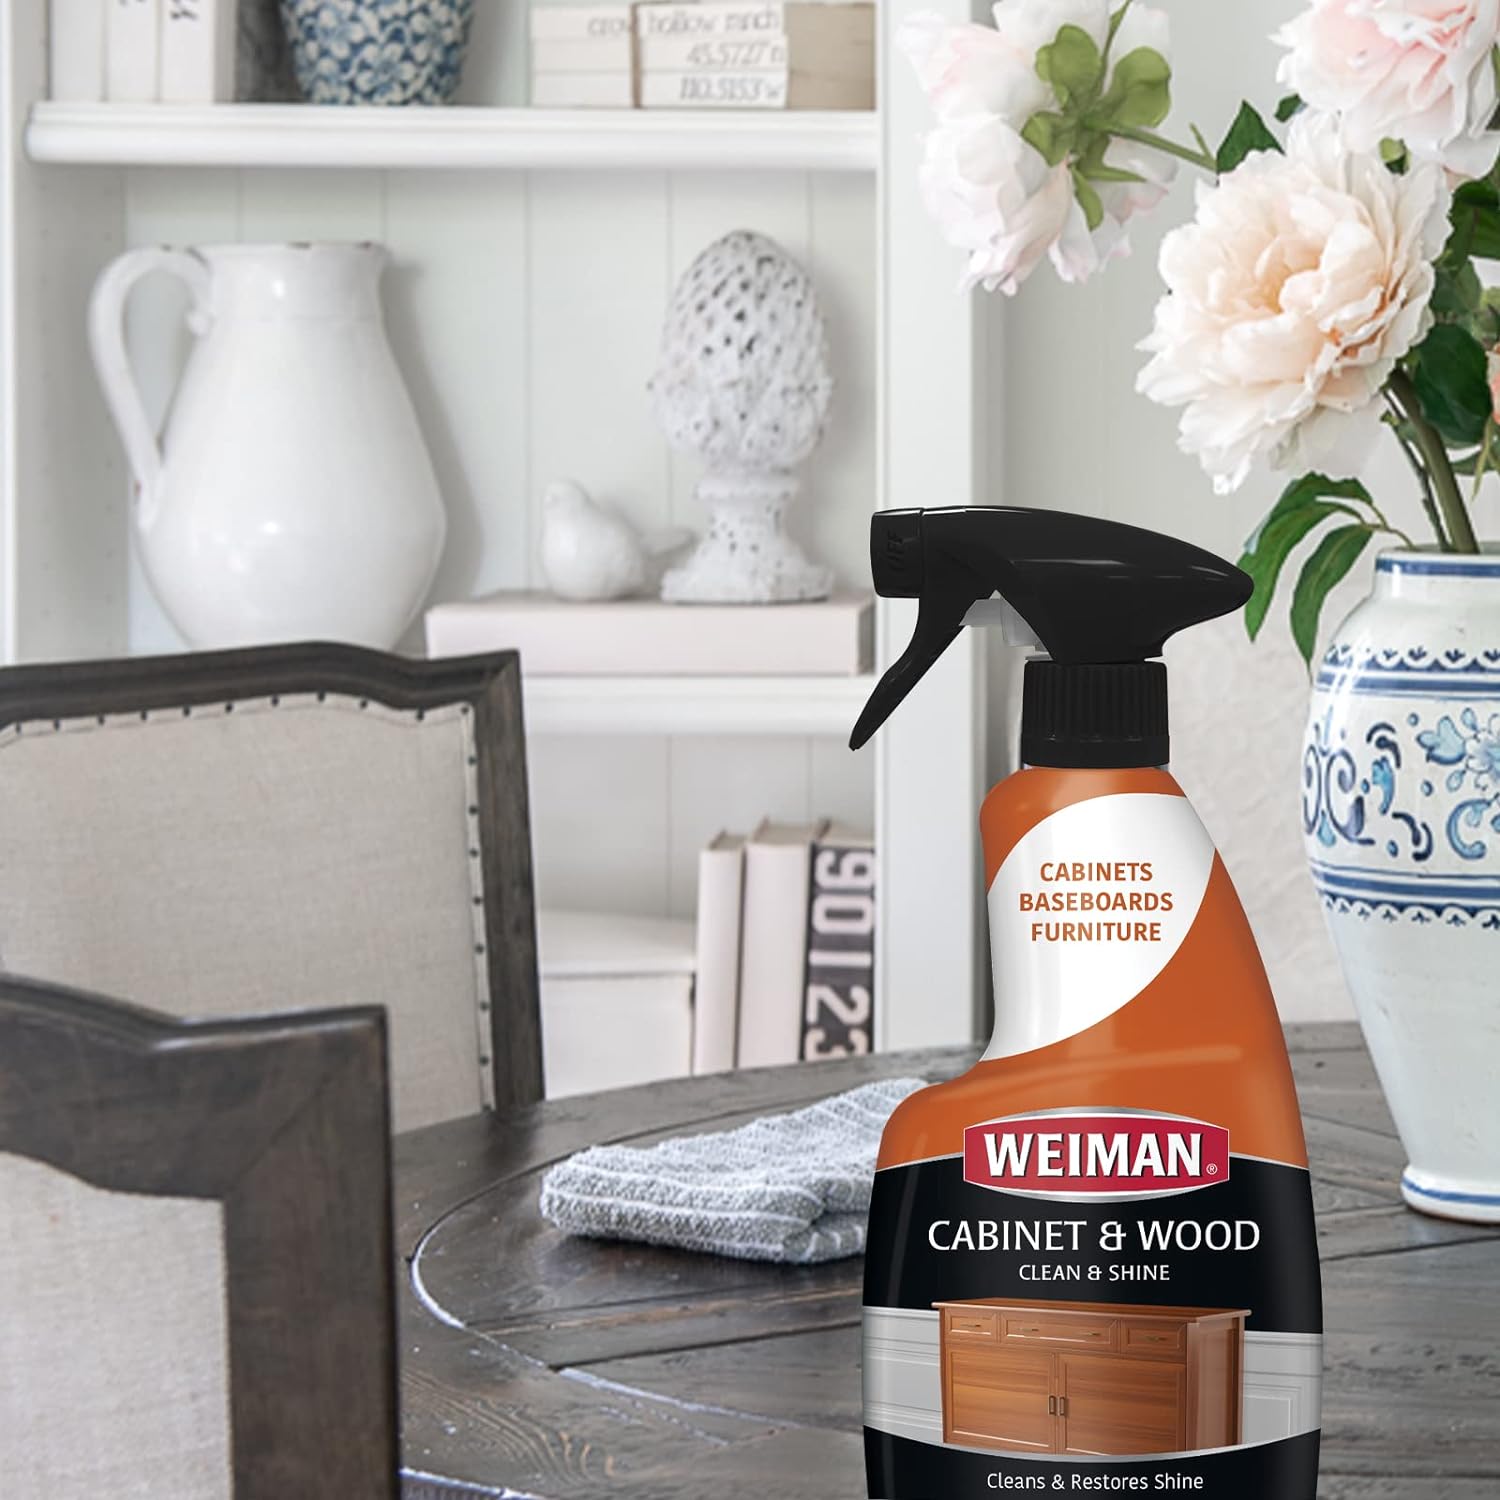 Weiman Cabinet & Wood Clean & Shine Spray - Furniture, Kitchen Cabinets, Baseboard & Trim, Fresh Almond Scent - Microfiber Cloth Included : Weiman: Health & Household